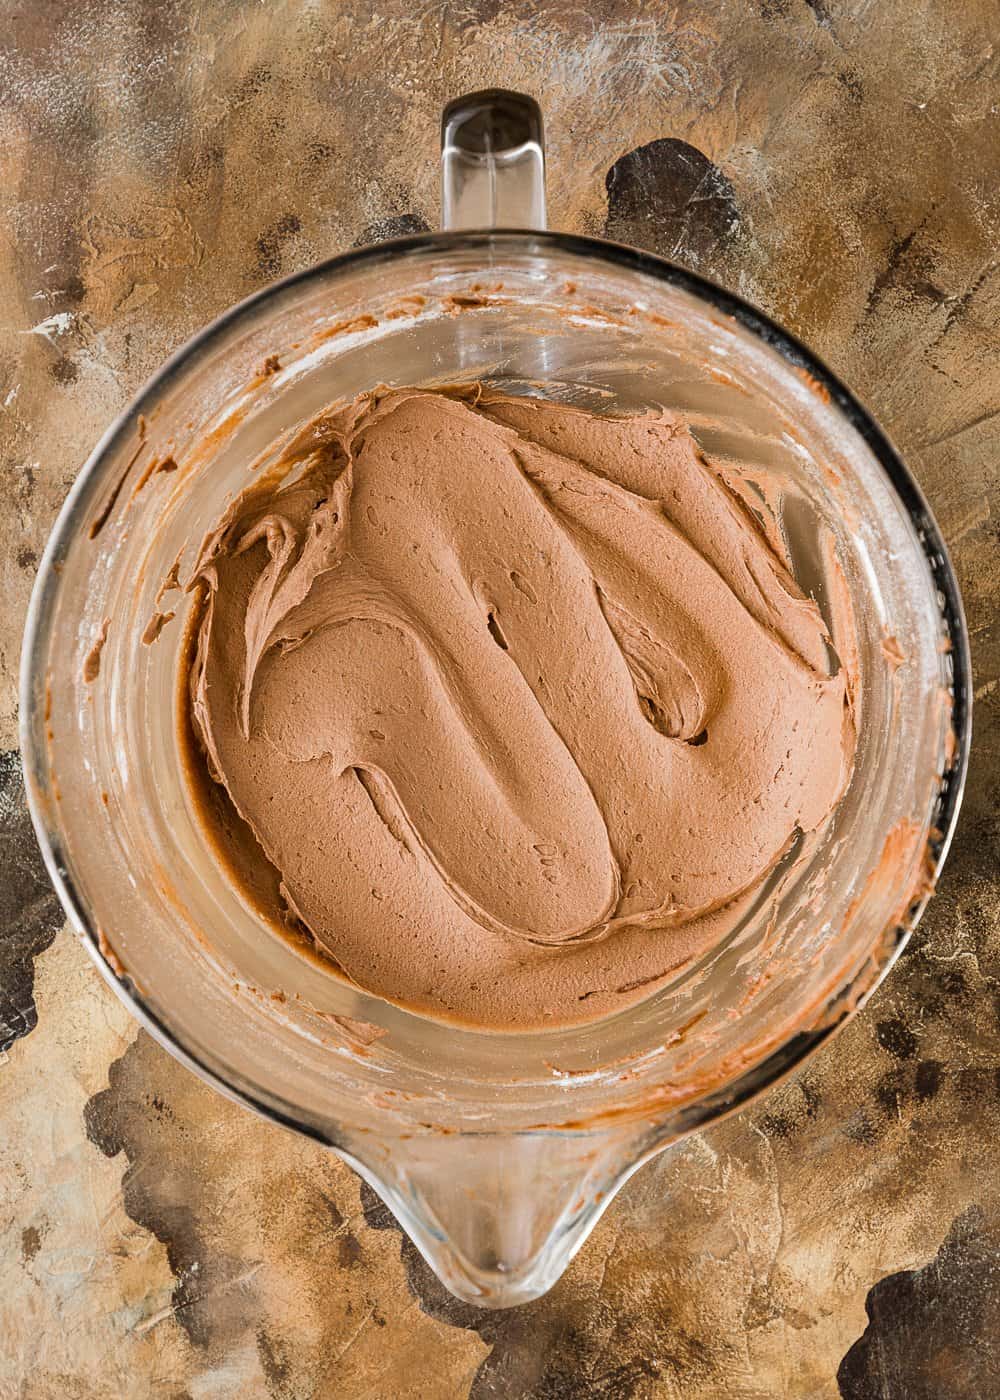 How to make Chocolate Frosting step by step 5